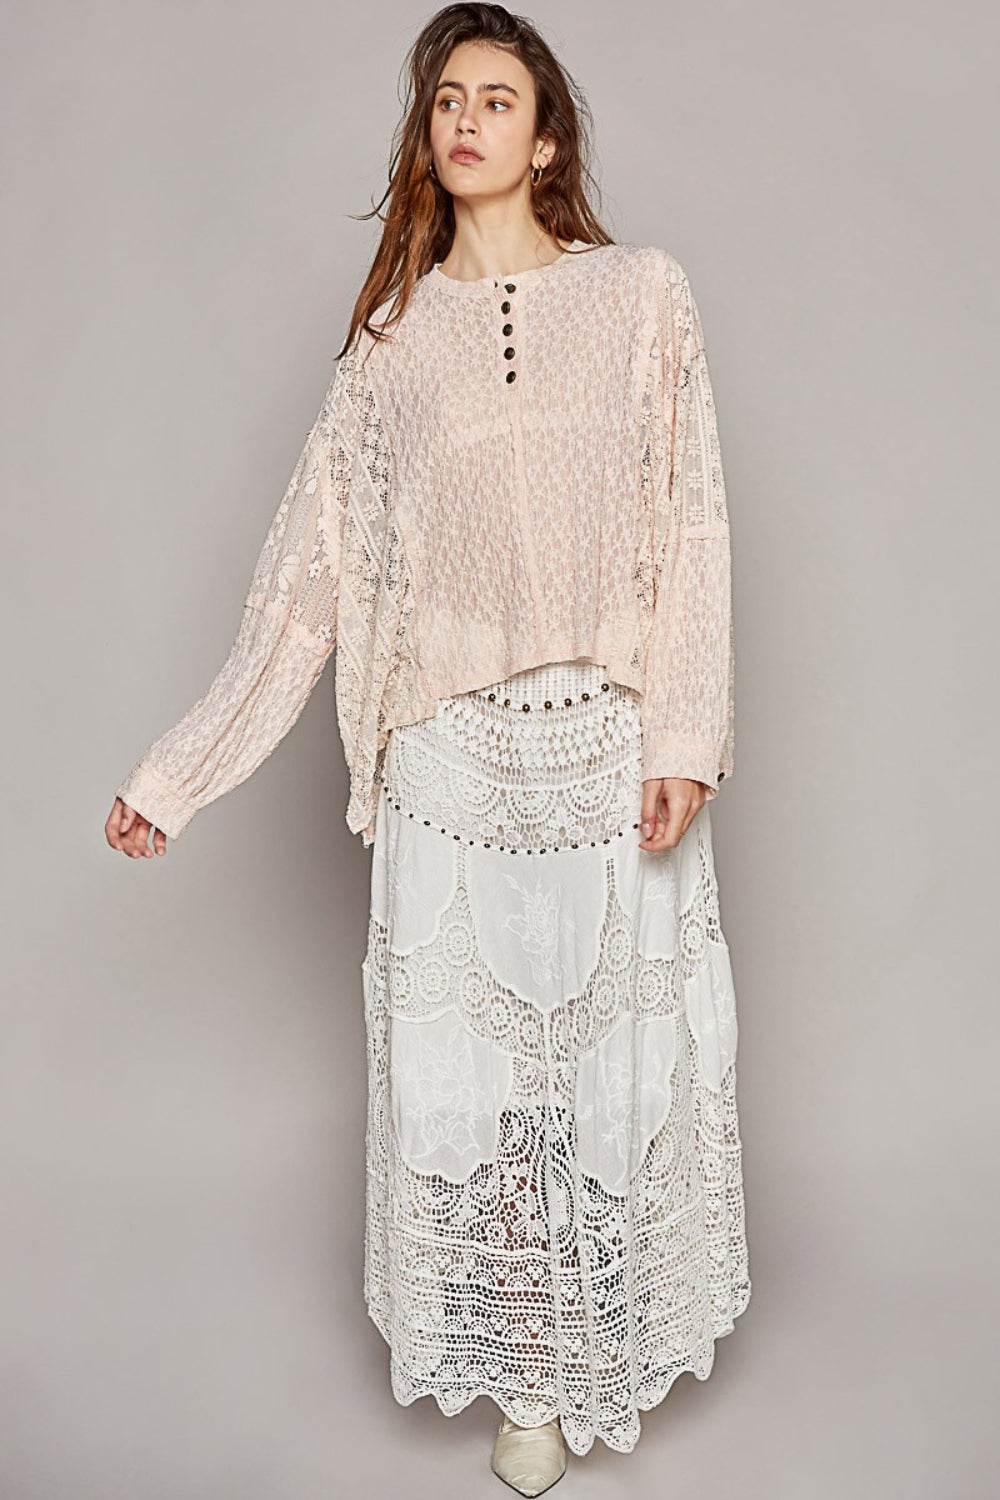 Round Neck Long Sleeve Raw Edge Lace Top